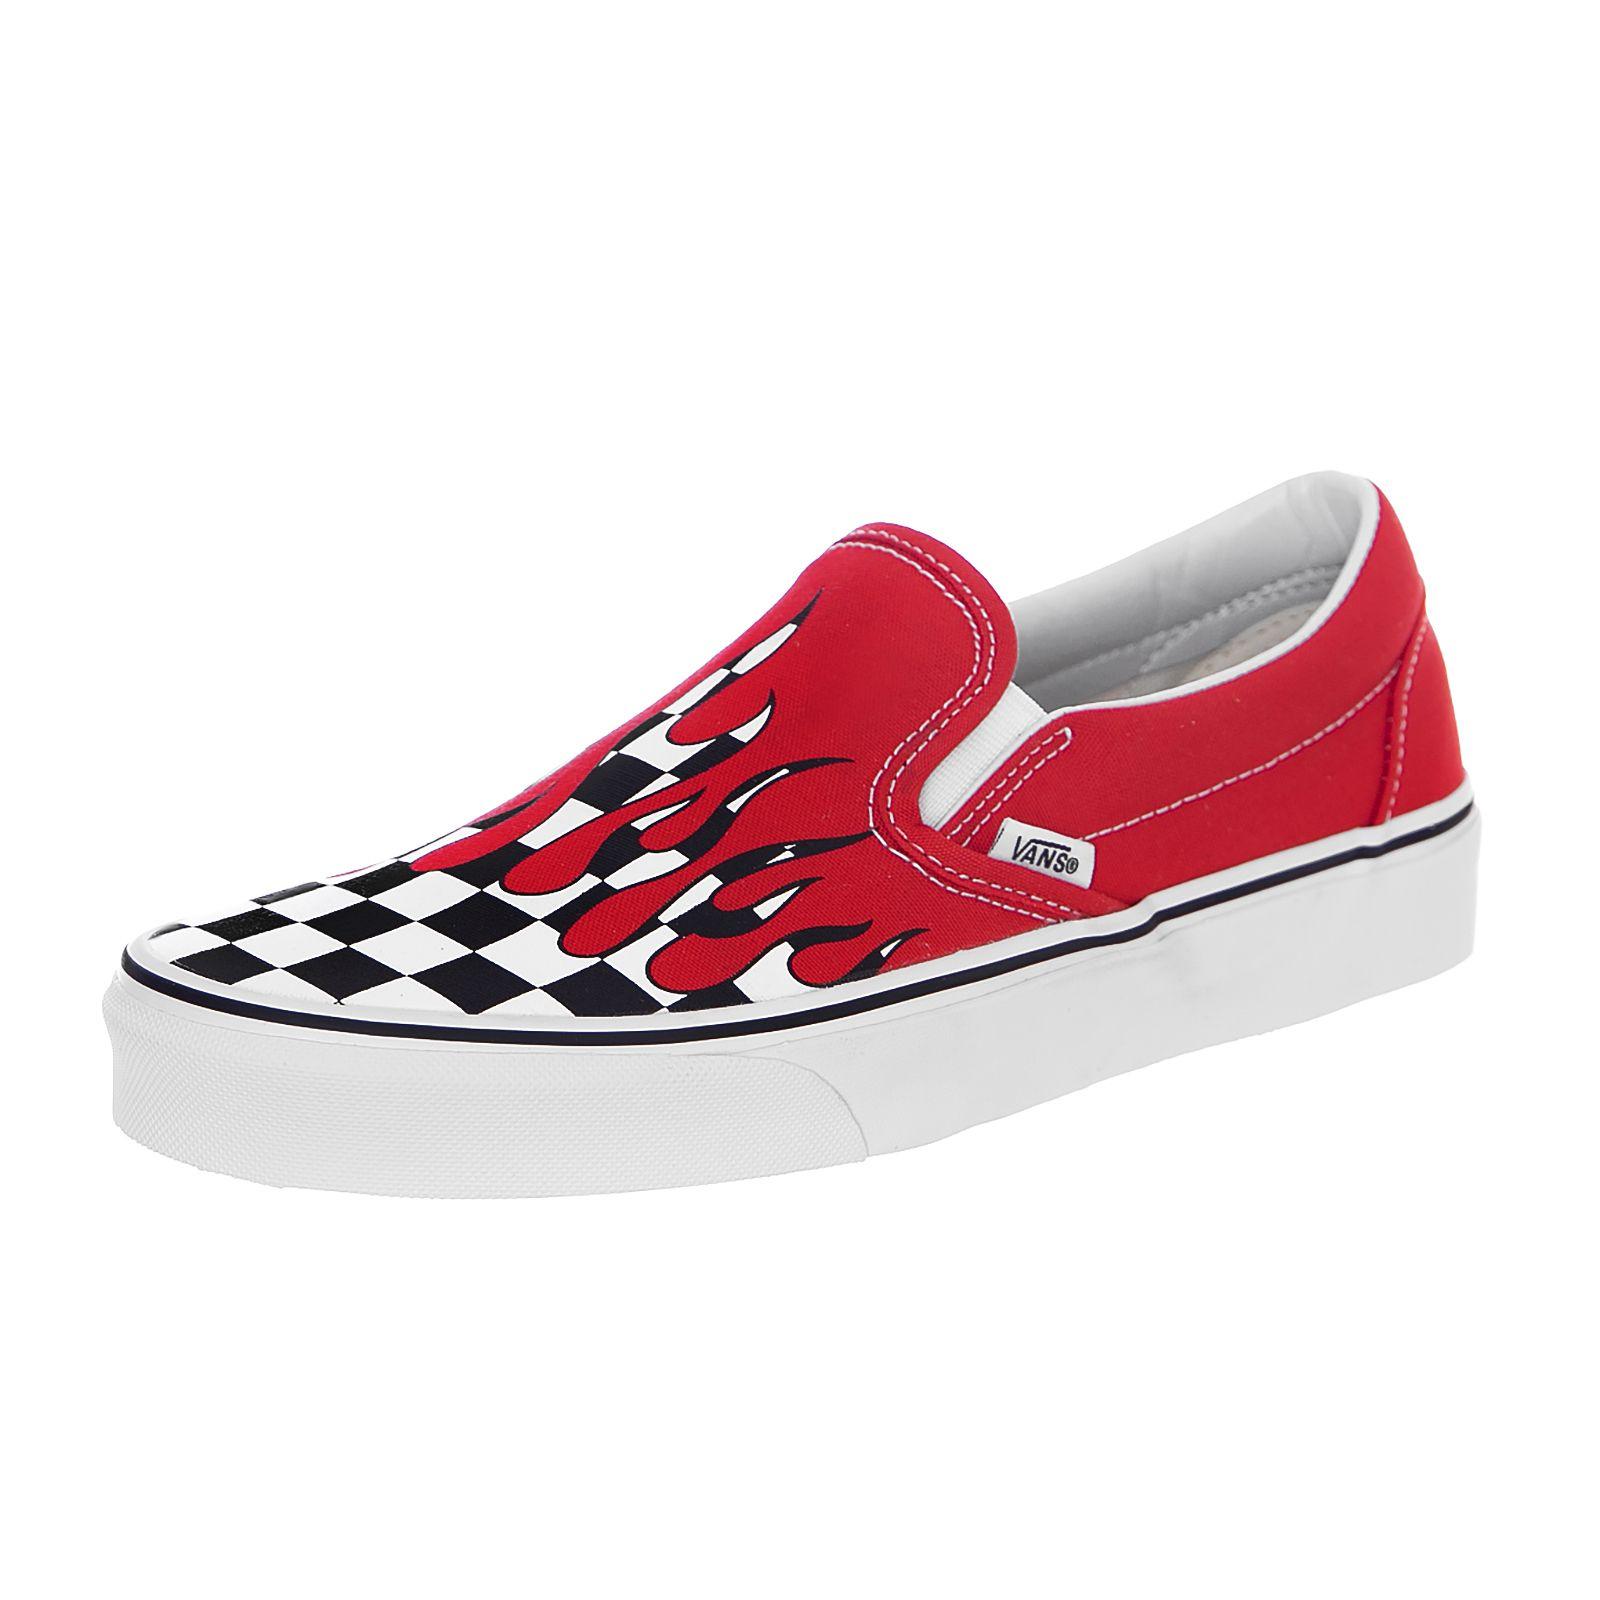 Red Checkered Vans Logo - Vans Sneakers Classic Slip-On (Checker Flame) Racing Red Rosso | eBay